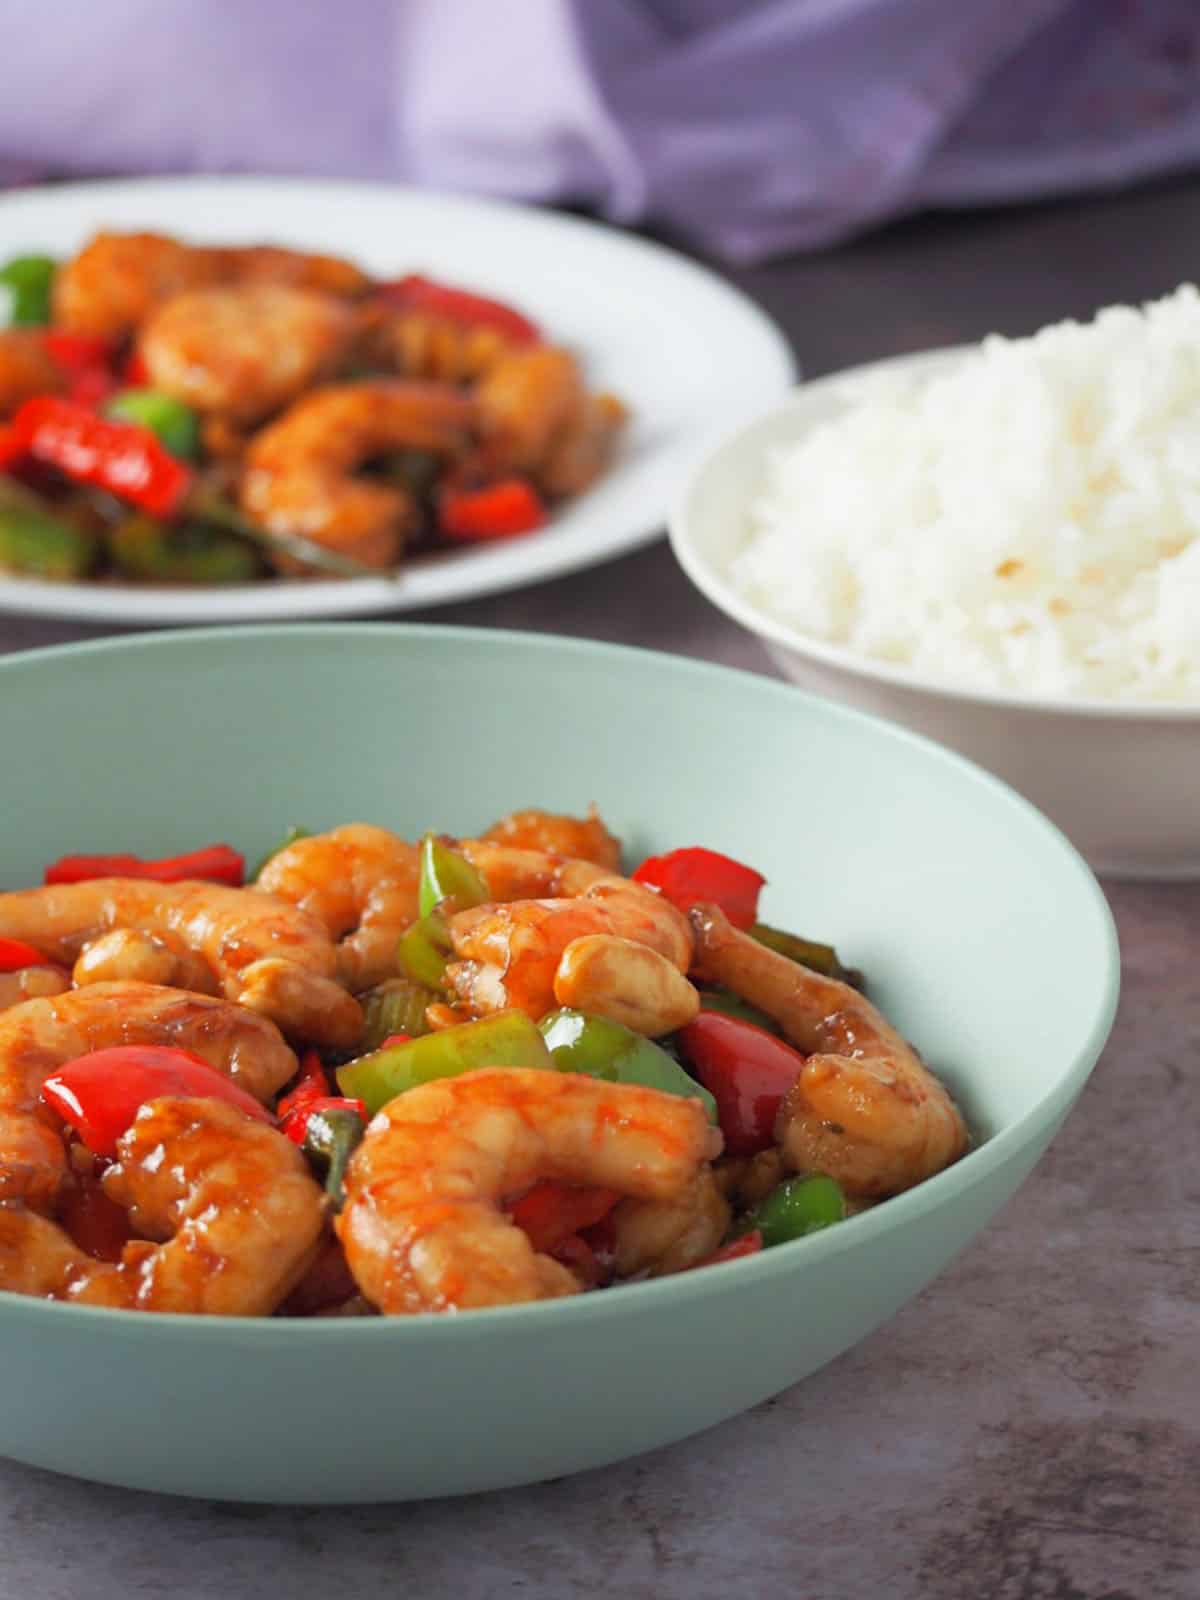 Kung Pao Shrimp in a bowl with steamed rice on the side